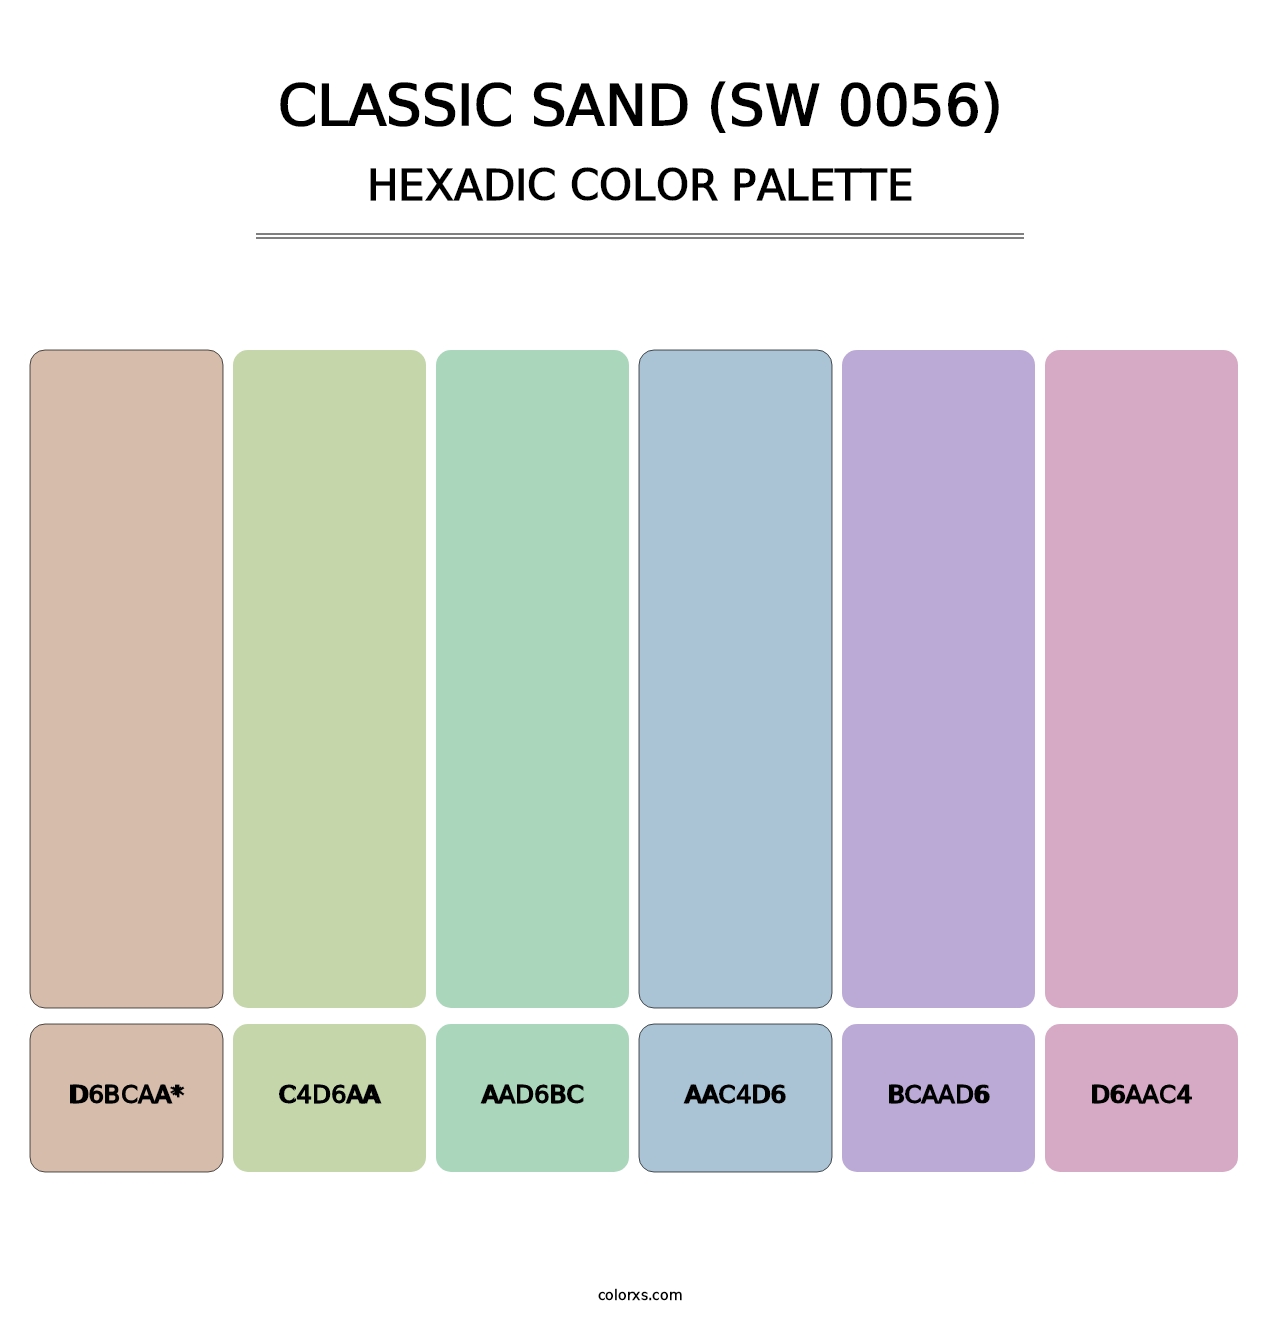 Classic Sand (SW 0056) - Hexadic Color Palette